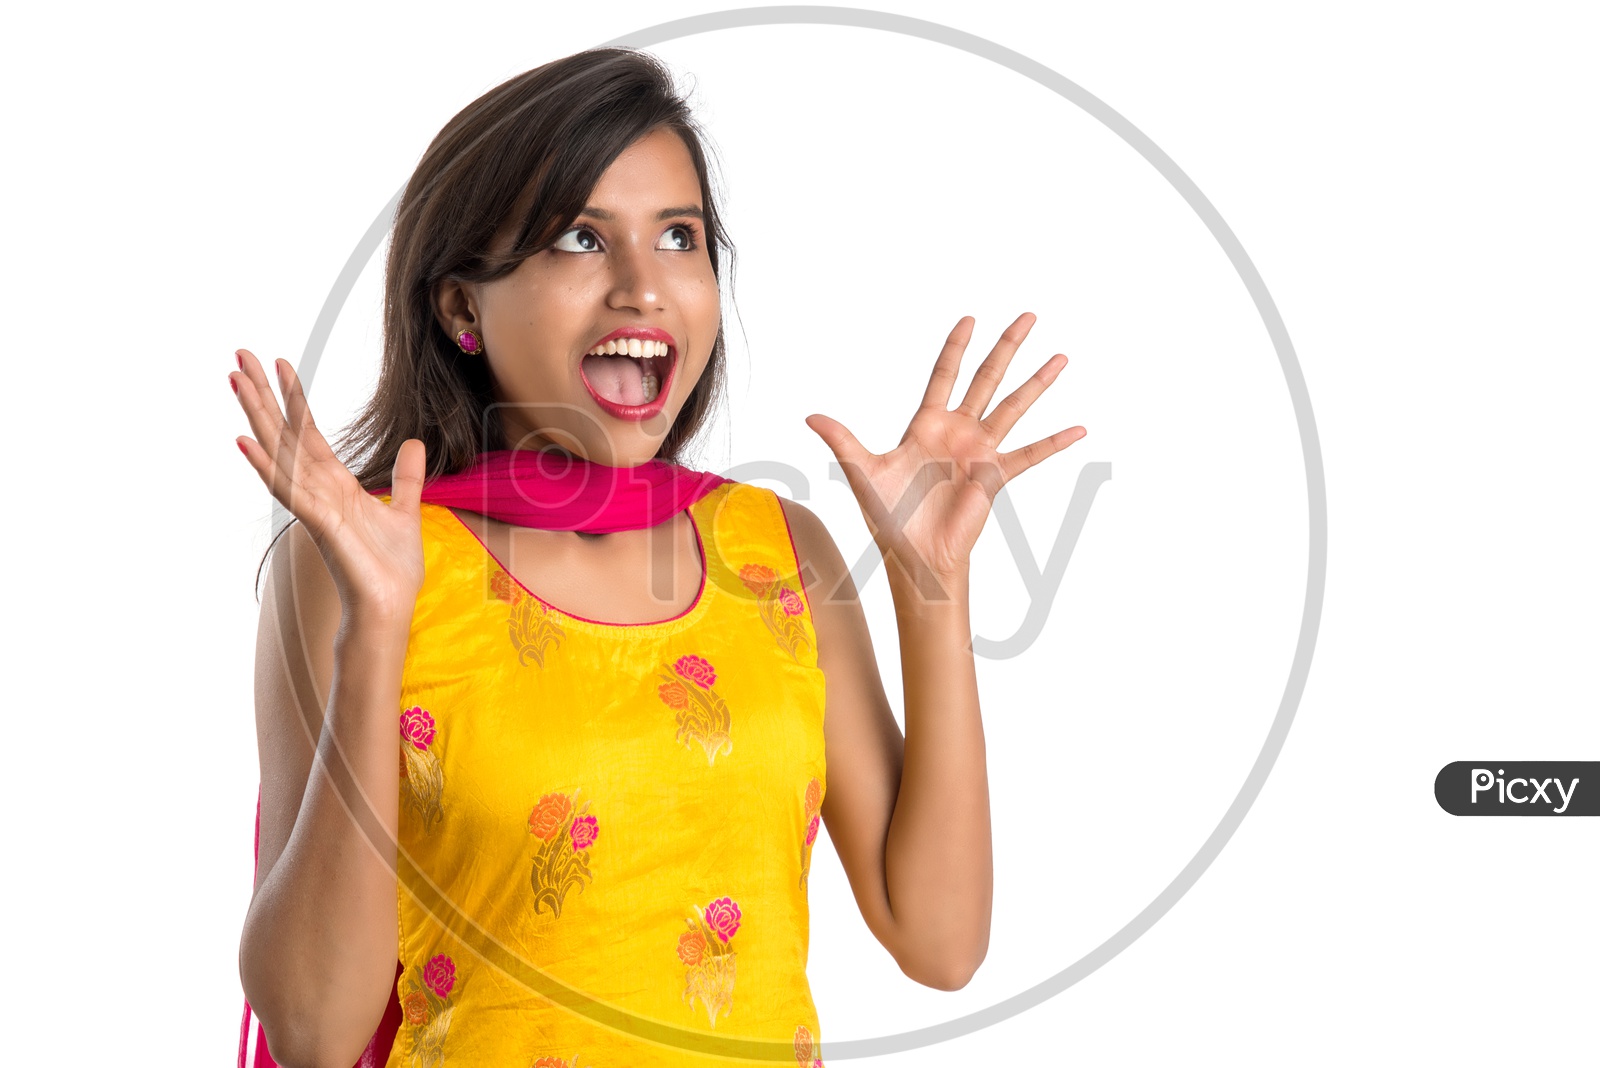 Young Indian Woman or Girl With Smiling Face And Happy Expressions On an Isolated White Background